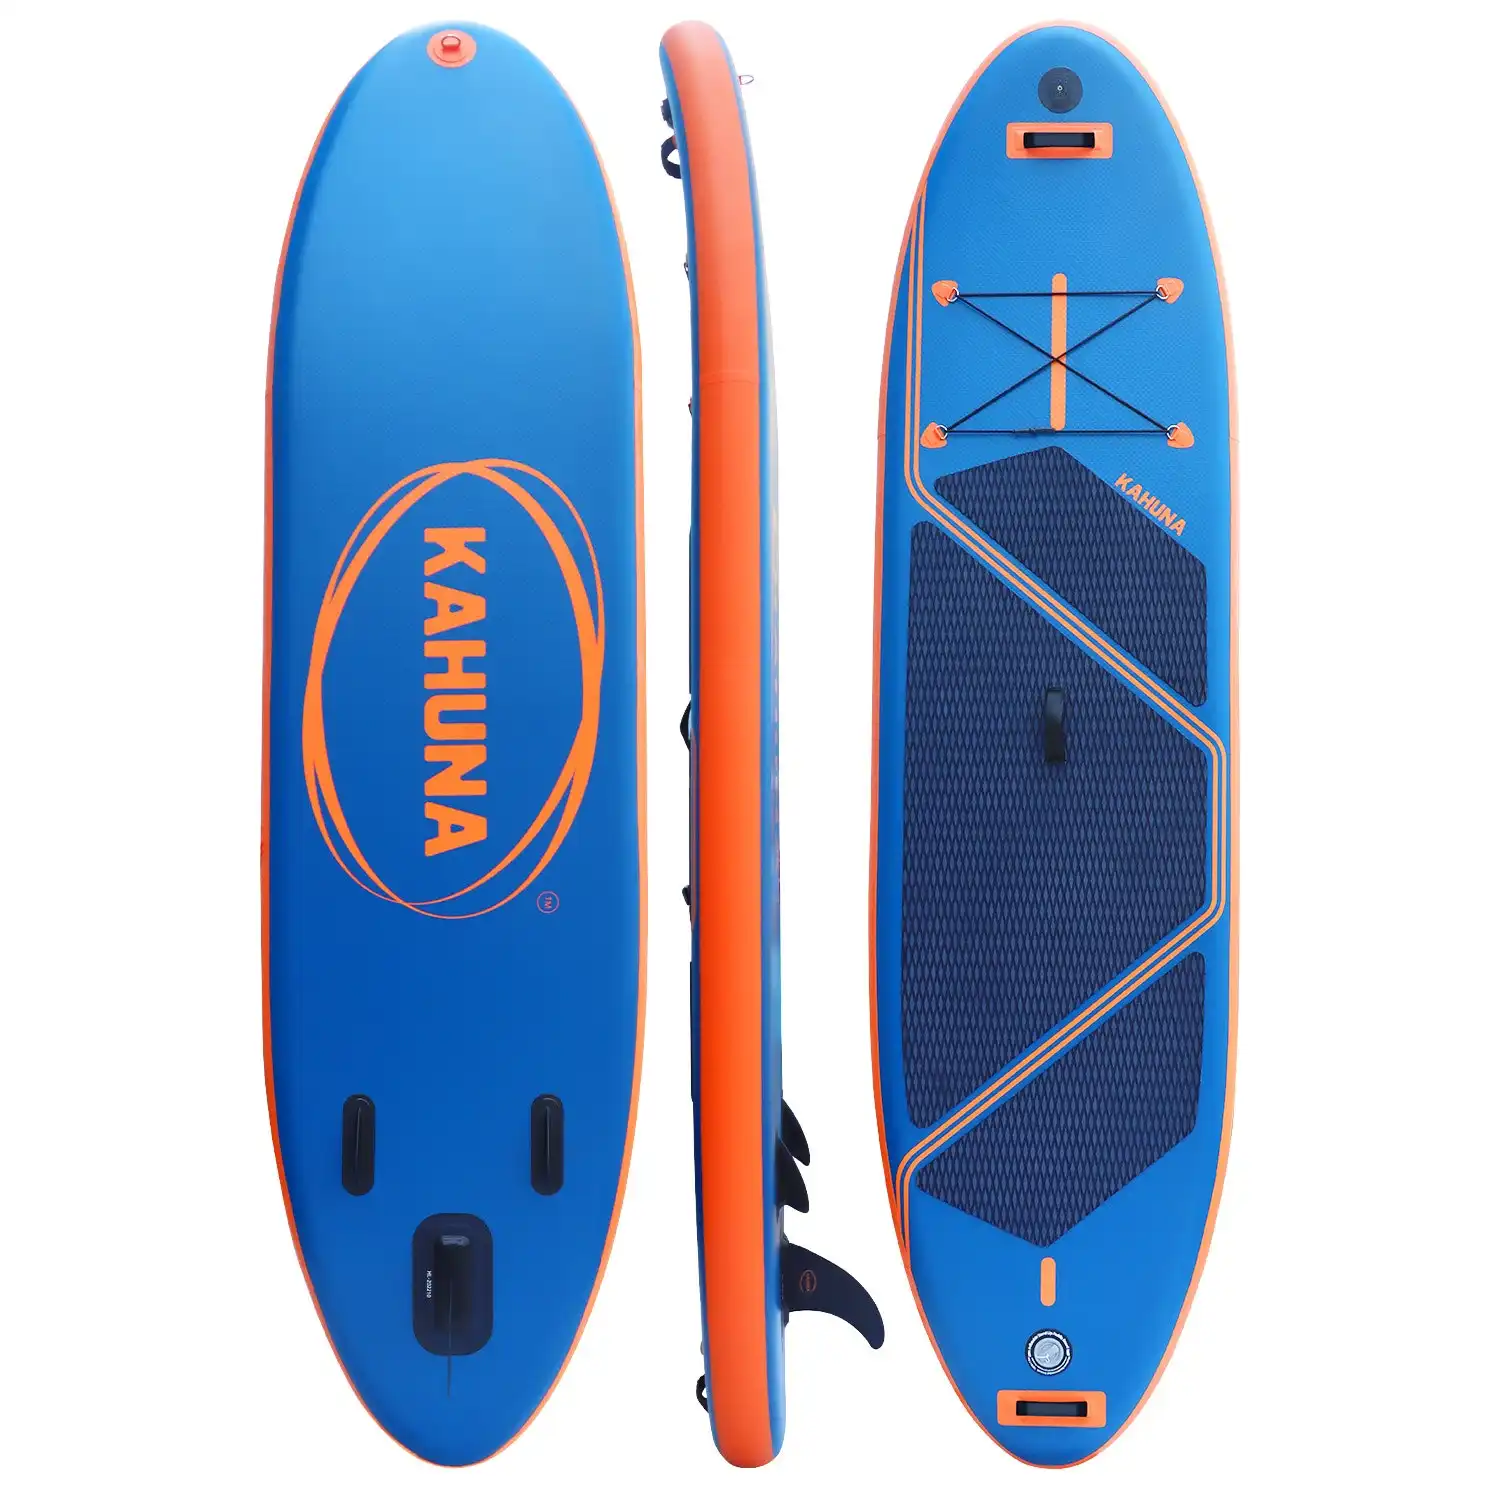 Kahuna Kai Premium Sports 10.6FT Inflatable Stand Up Paddle Board with iSUP Accessories & Carry Bag